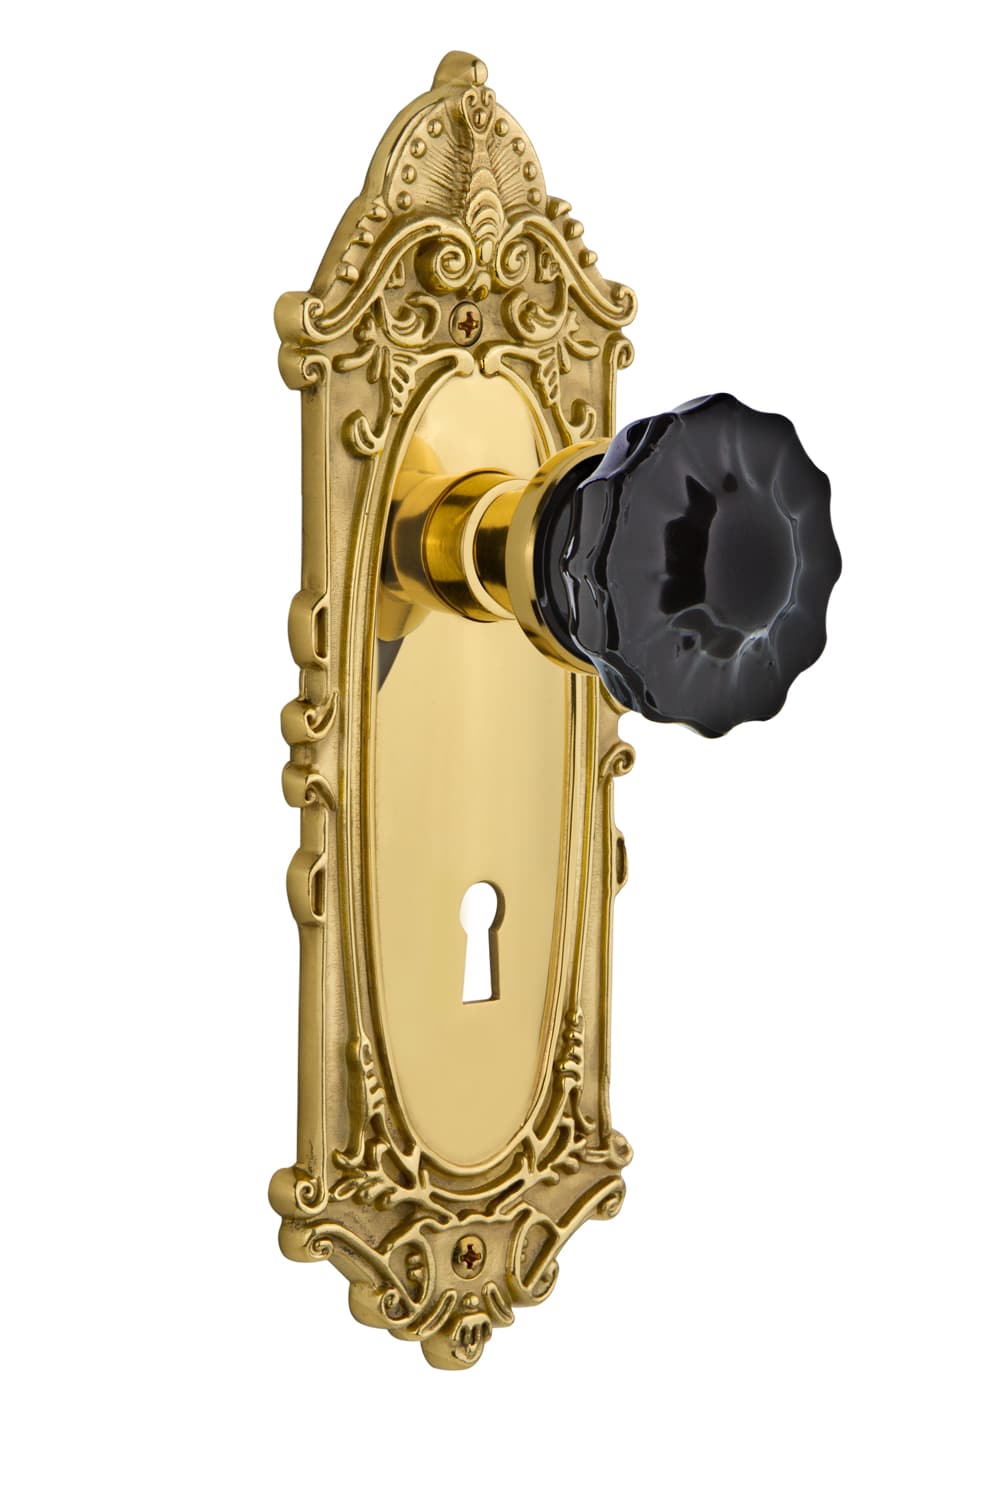 2.75 Nostalgic Warehouse 727389 Meadows Plate with Keyhole Privacy Crystal Black Glass Door Knob in Timeless Bronze